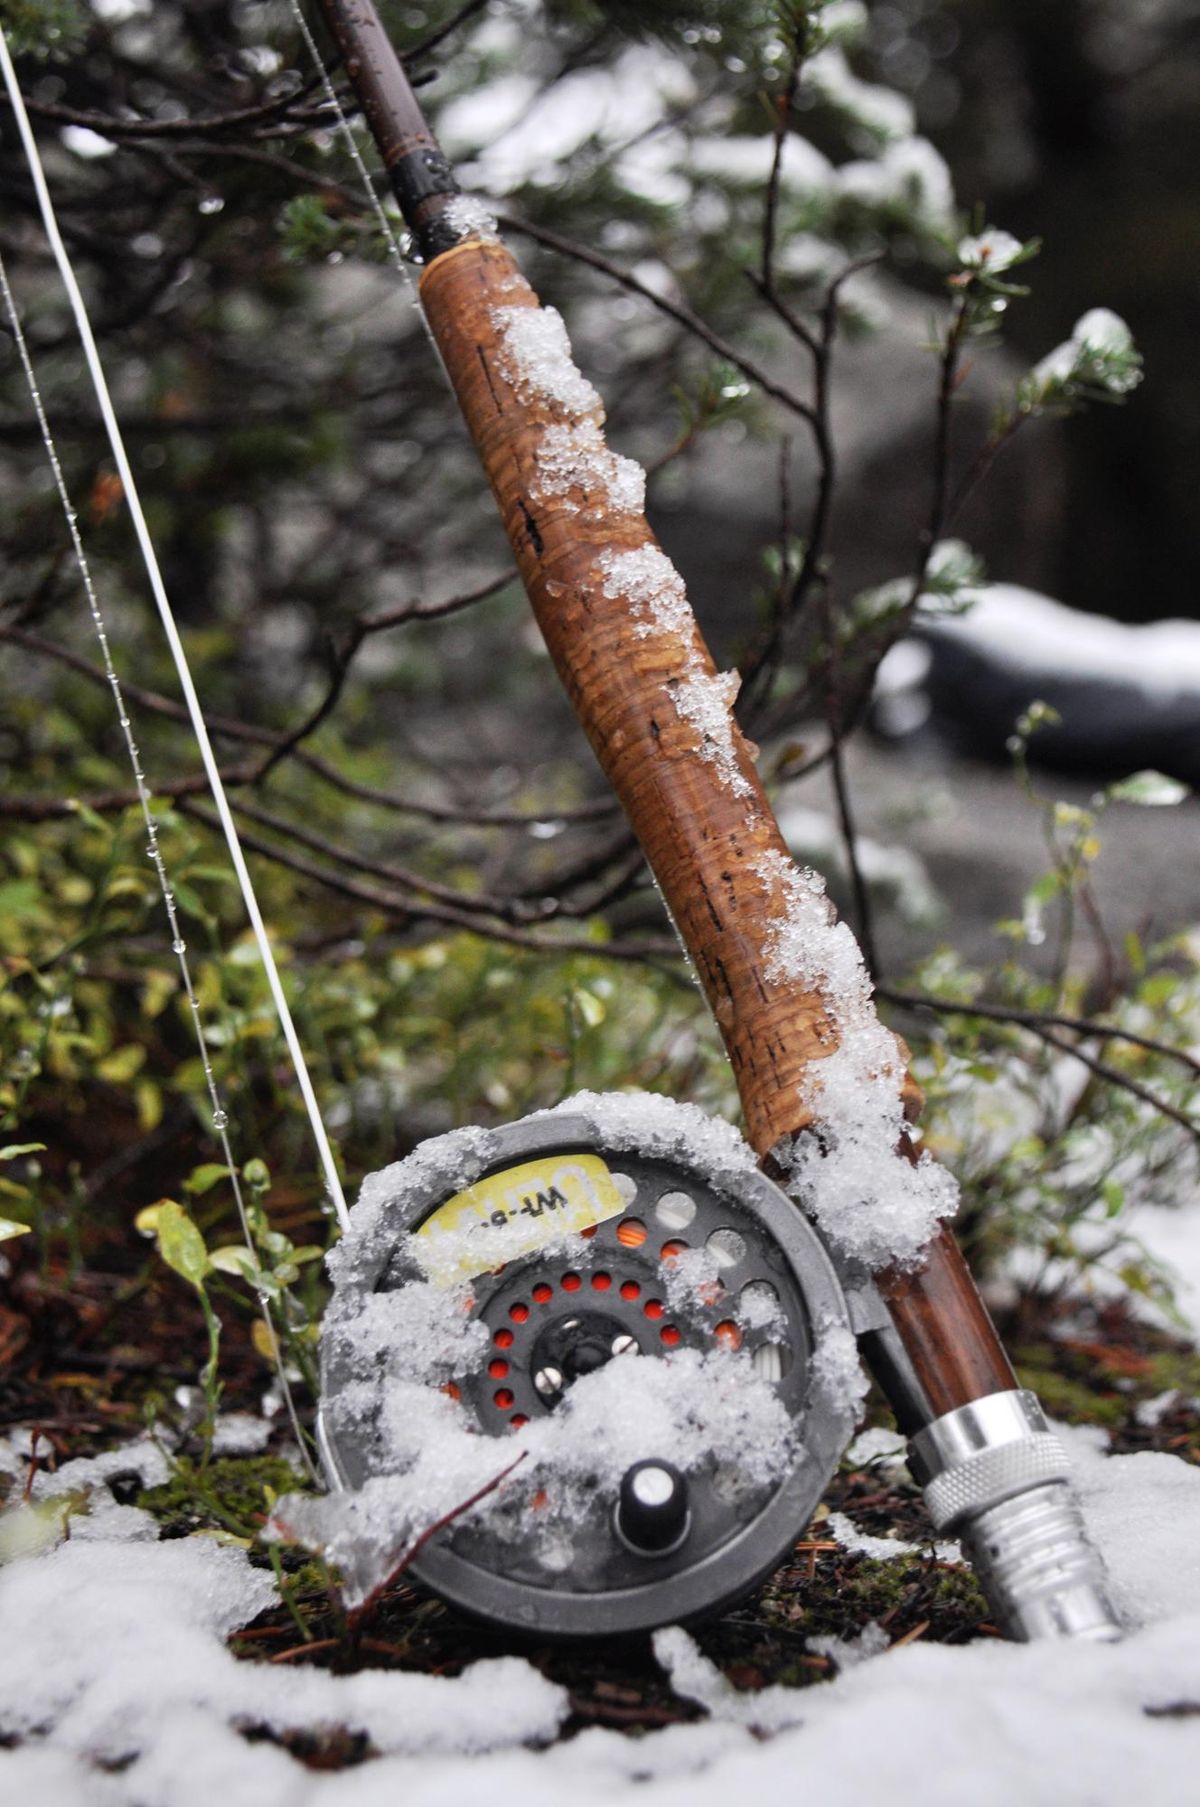 A weather report can help determine when to go fishing. (Rich Landers / The Spokesman-Review)